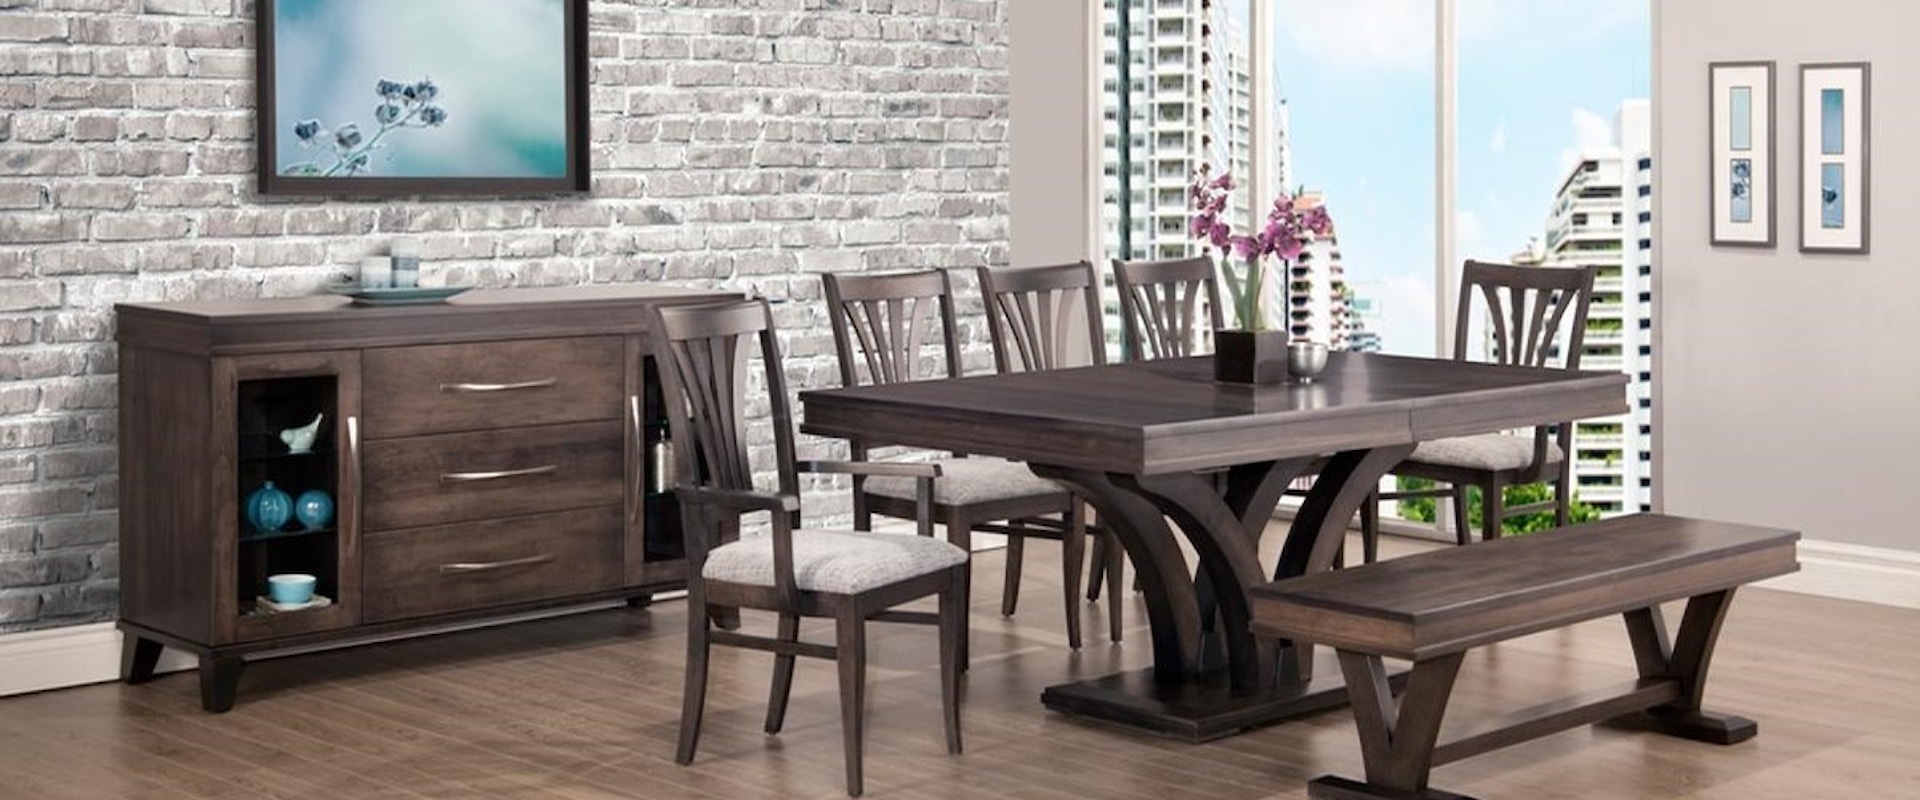 Customizable Verona Formal Dining Room Group with Bench